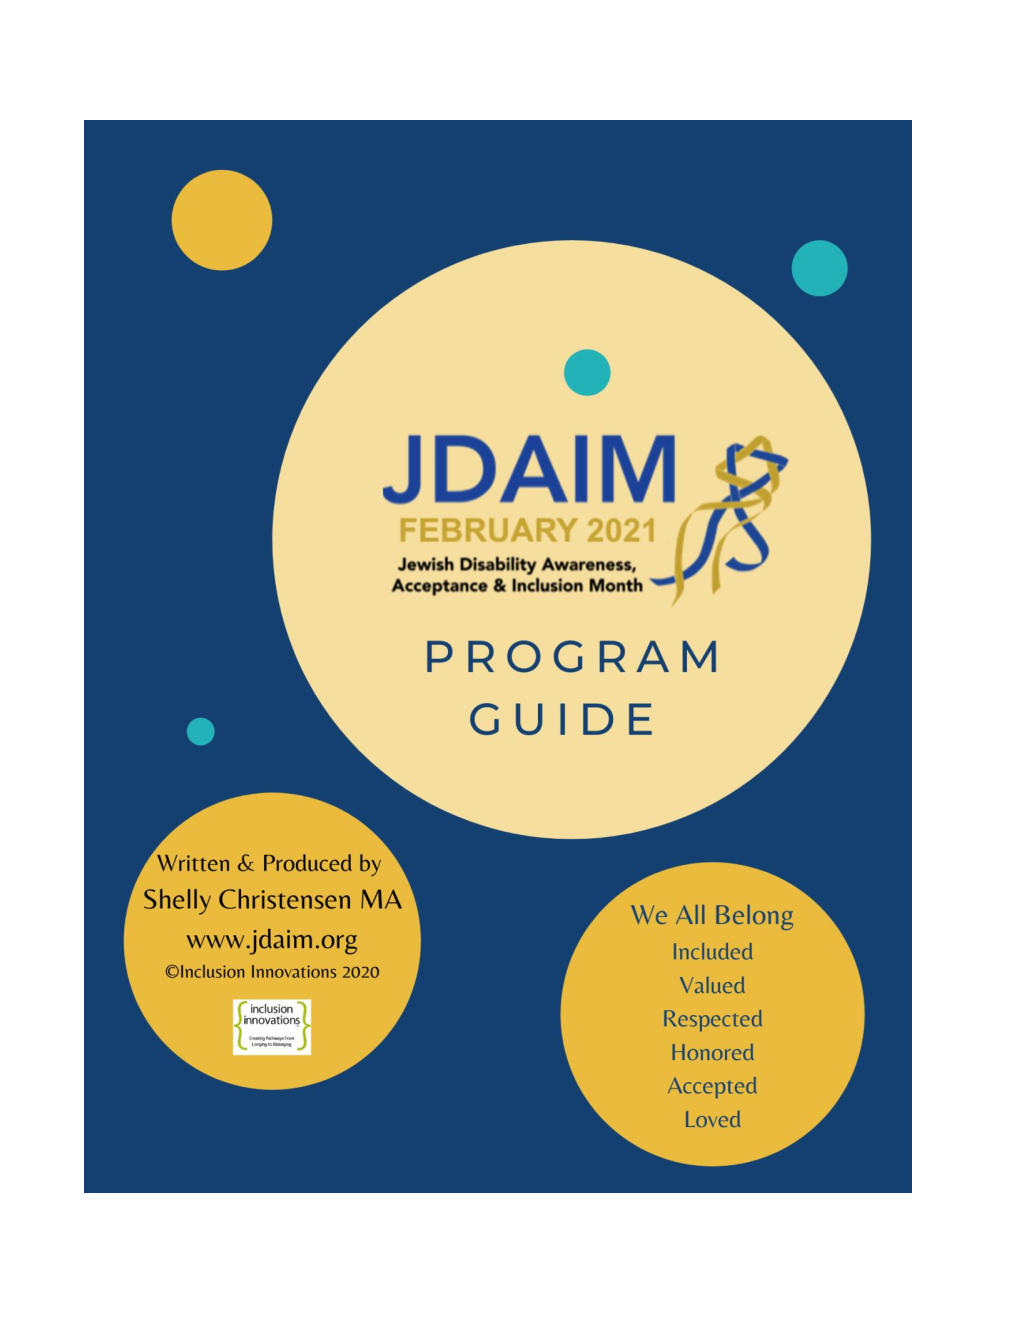 JDAIM 2021 Guide Is Granted by the Author for the Use by Organizations Worldwide to Foster Inclusion of People with Disabilities in Community Life